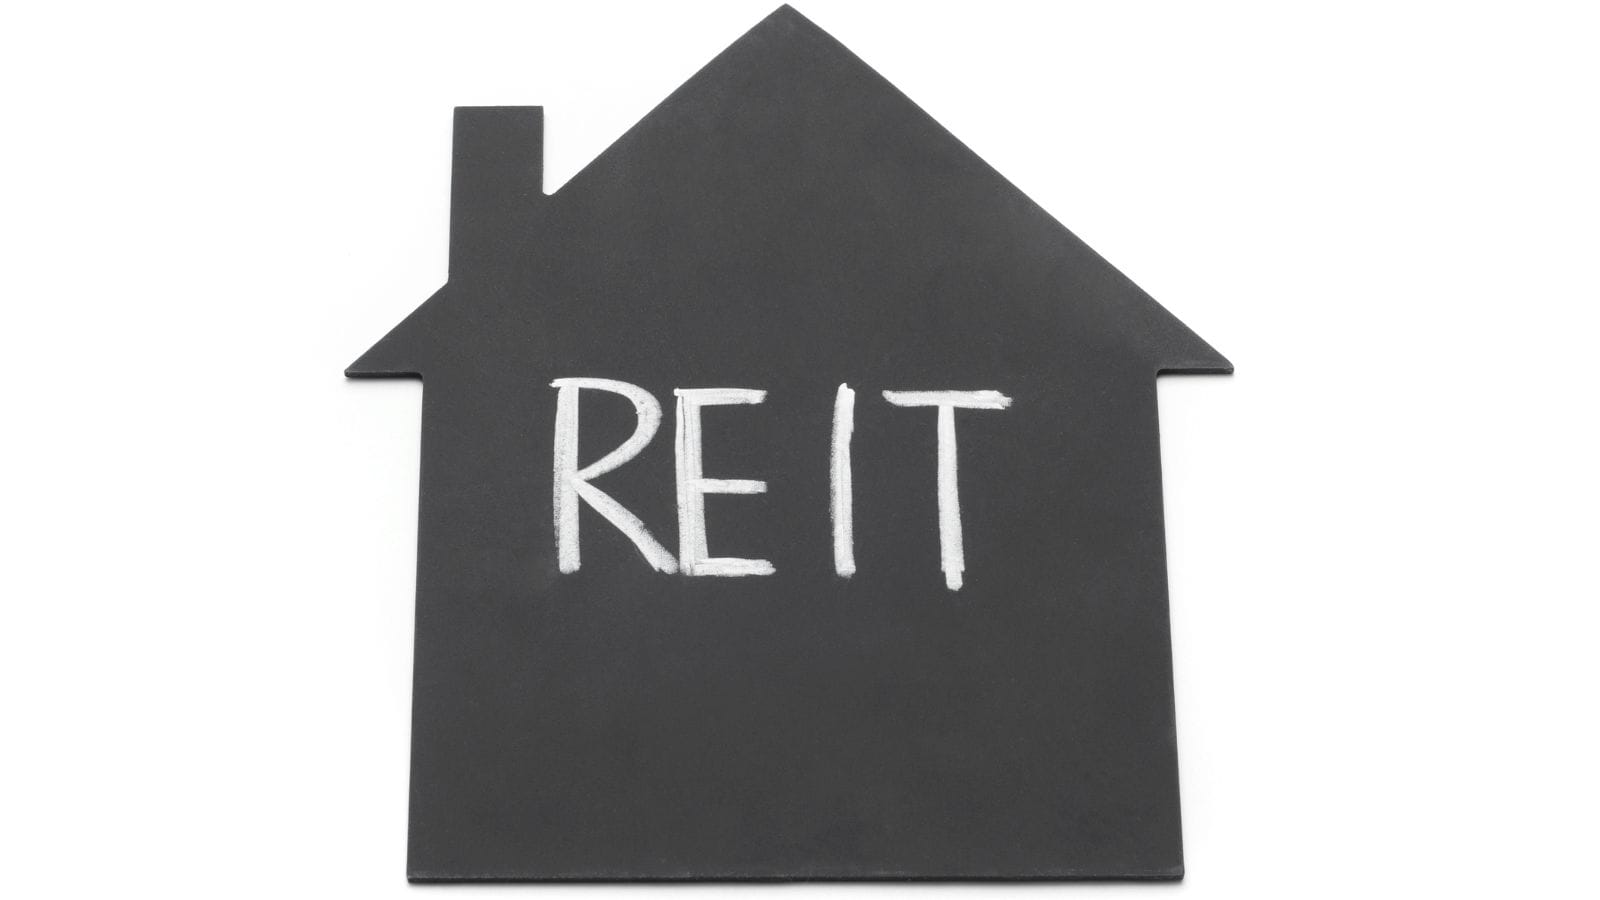 A picture containing house icon with the word REIT inside

